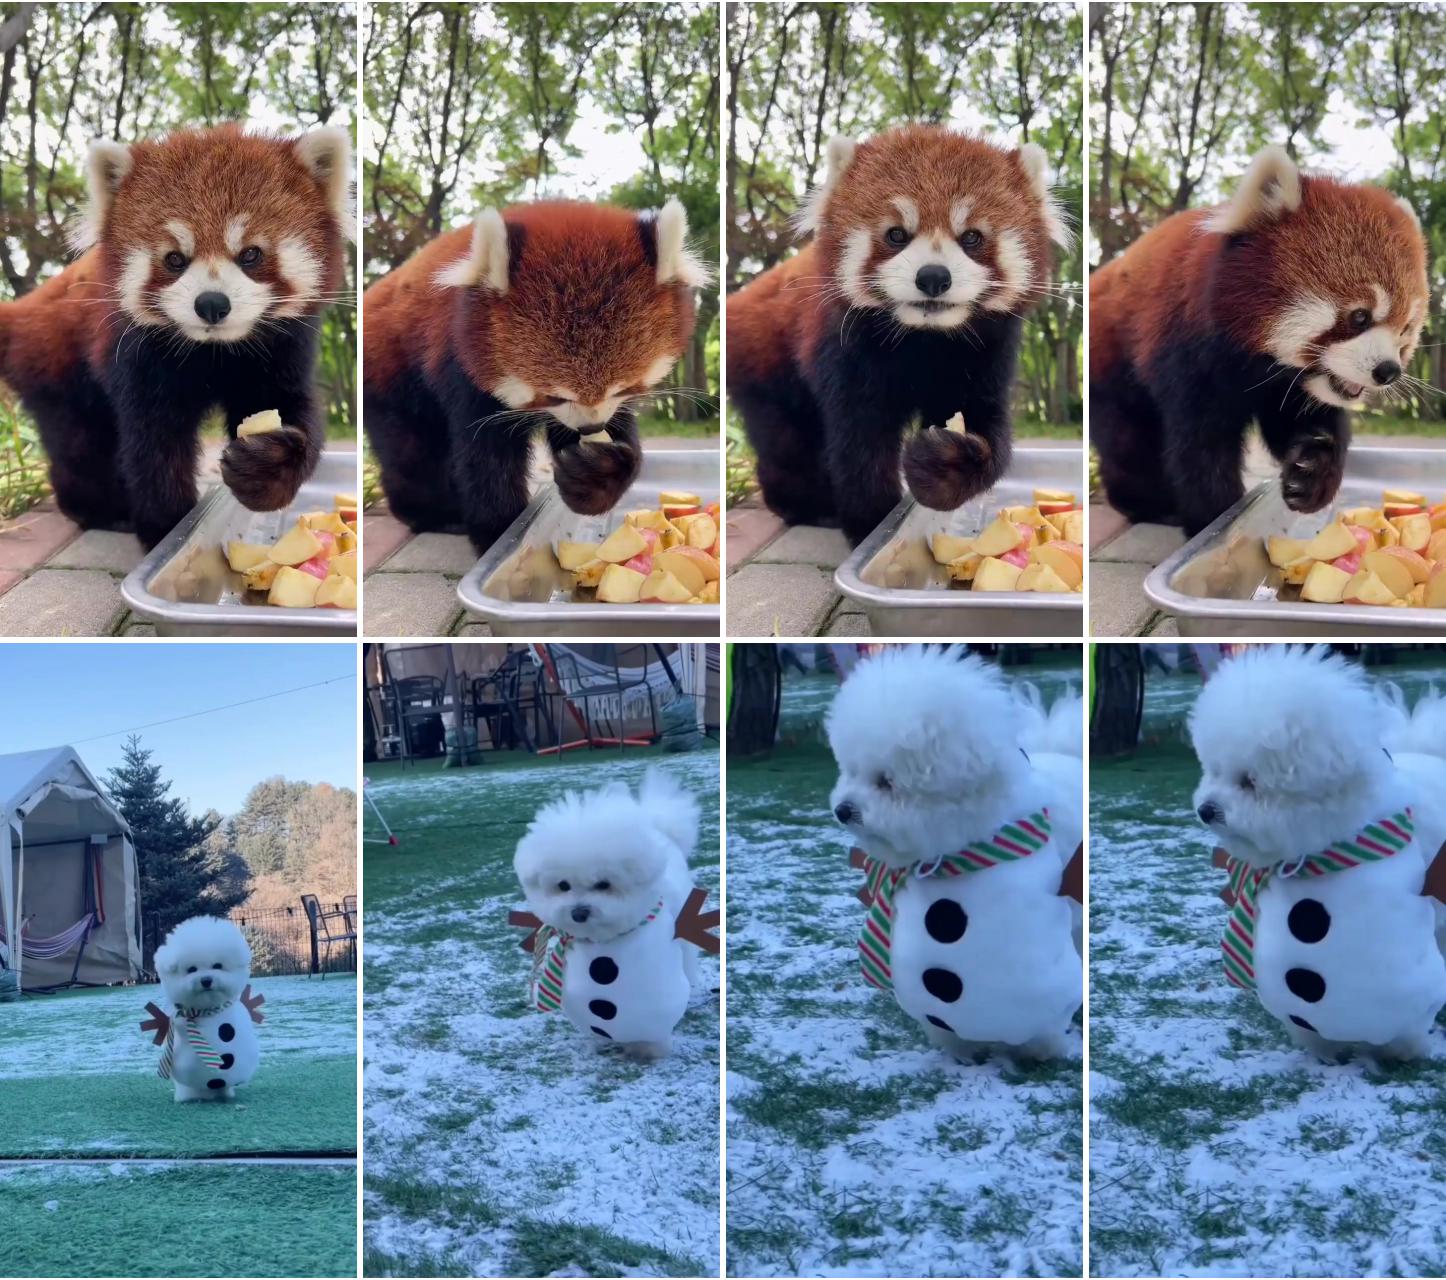 Feeding the lovely cute red panda; here comes the snowman